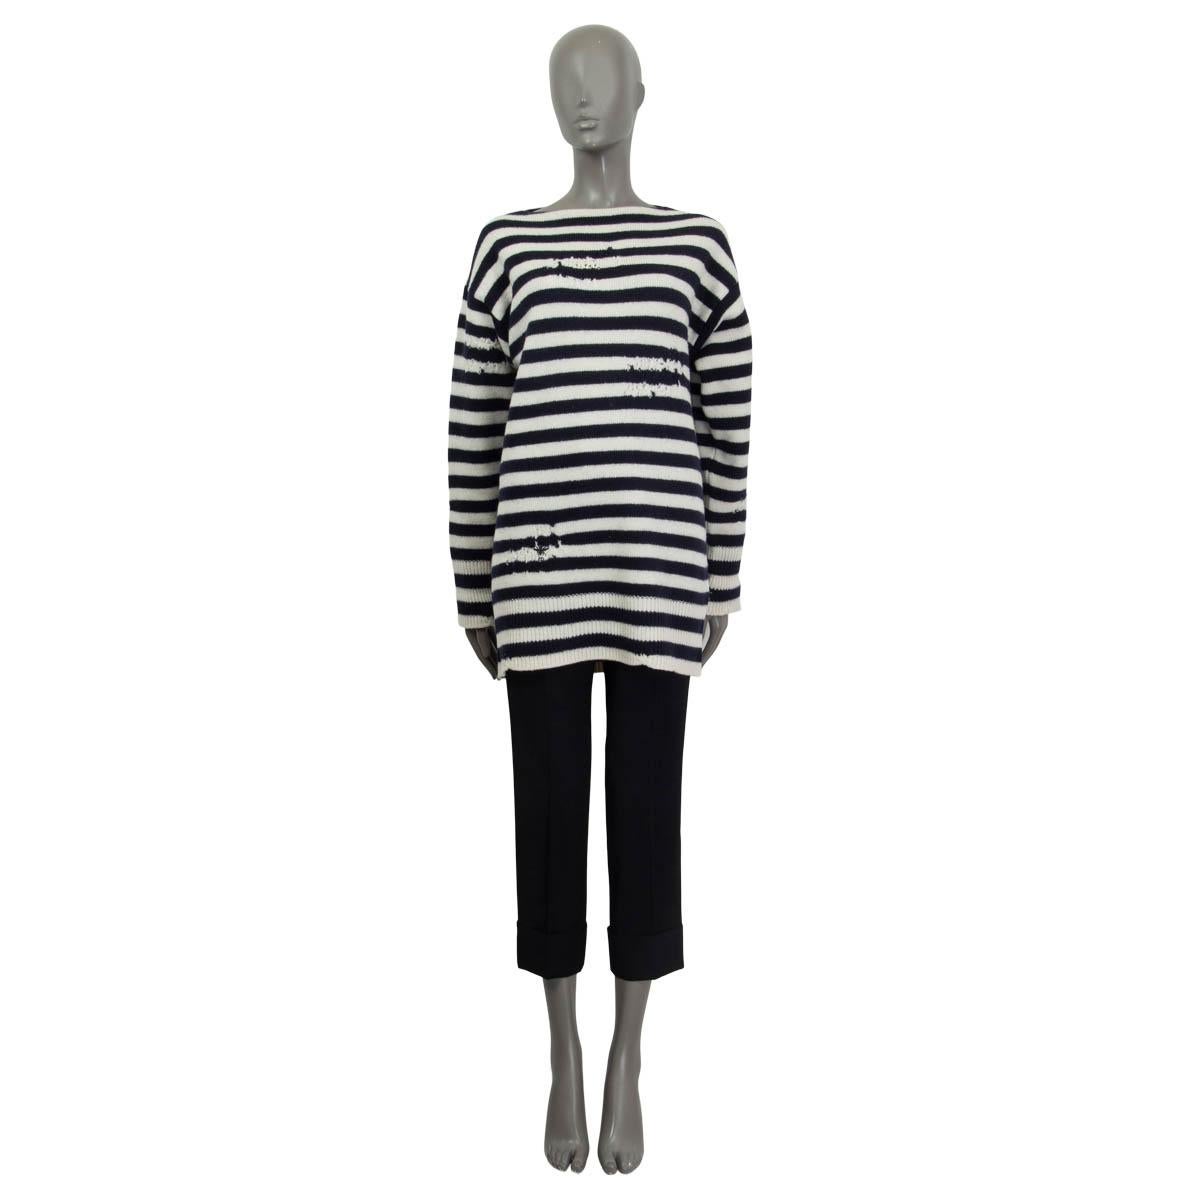 100% authentic Christian Dior oversized striped sweater in off-white and navy blue wool (50%) and cashmere (50%). Features distressed details all over the sweater and a boat neck. Unlined. Has been worn and is in excellent